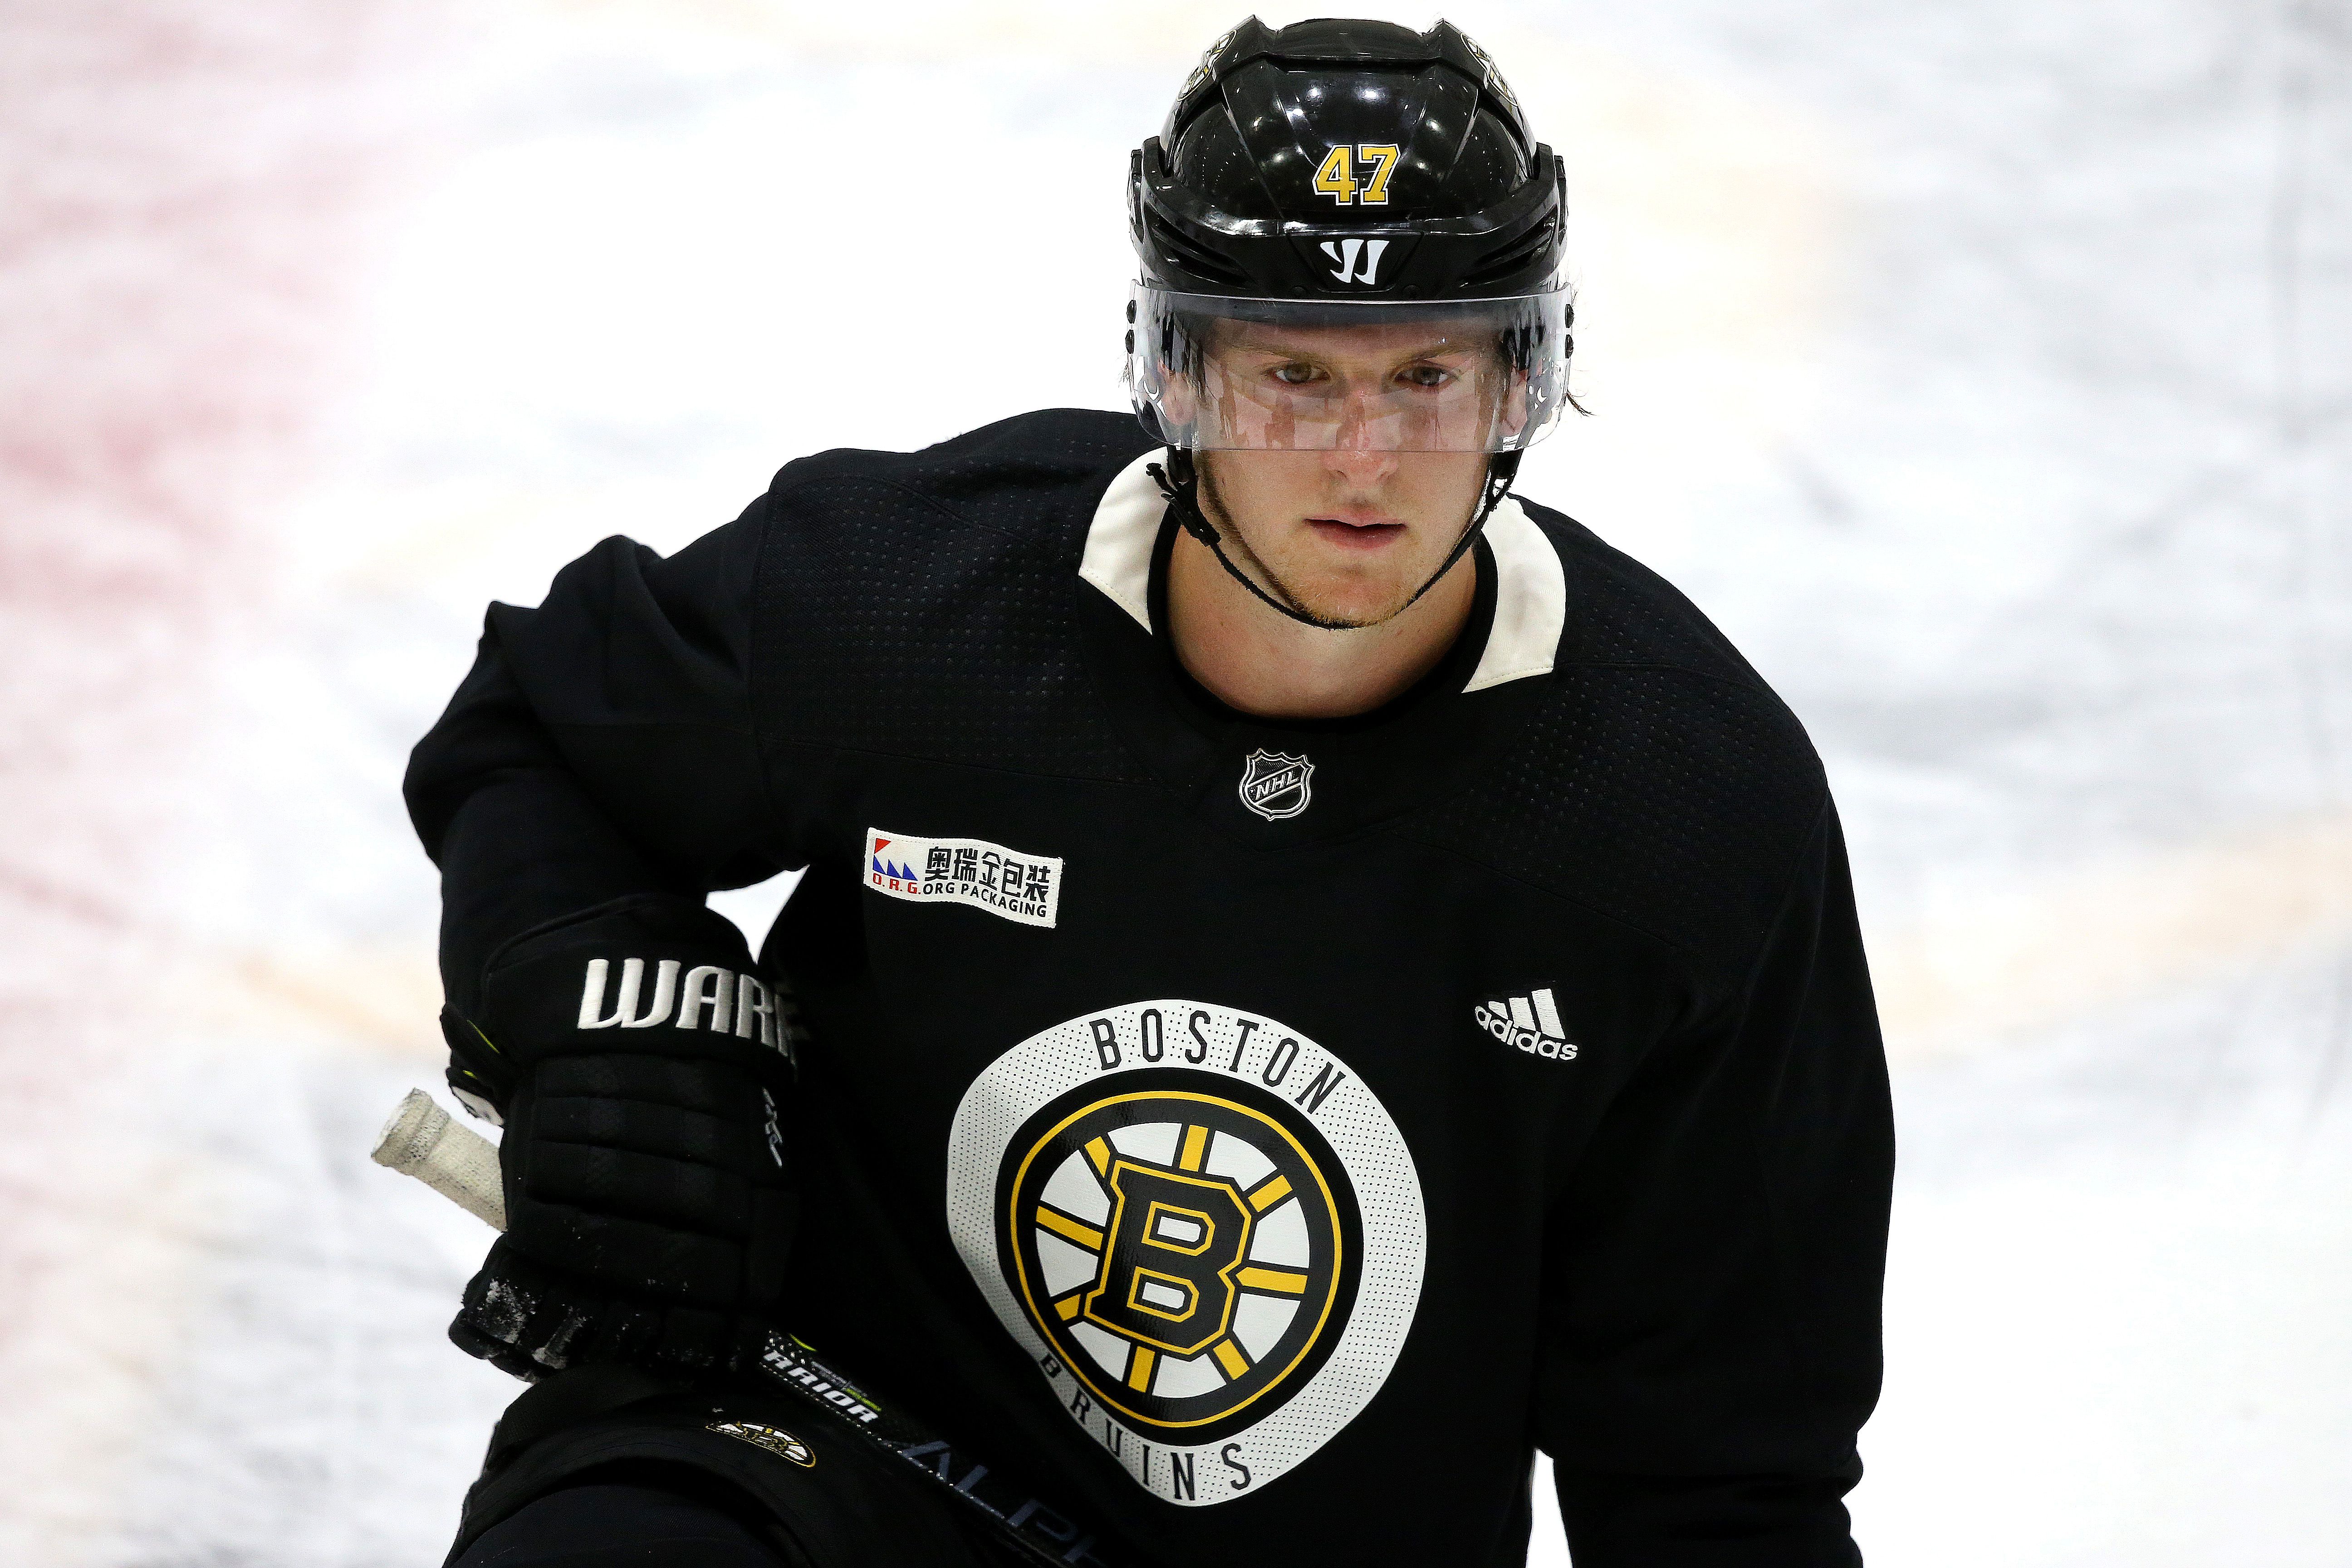 Morning sports update: Here's what Torey Krug had to say about his